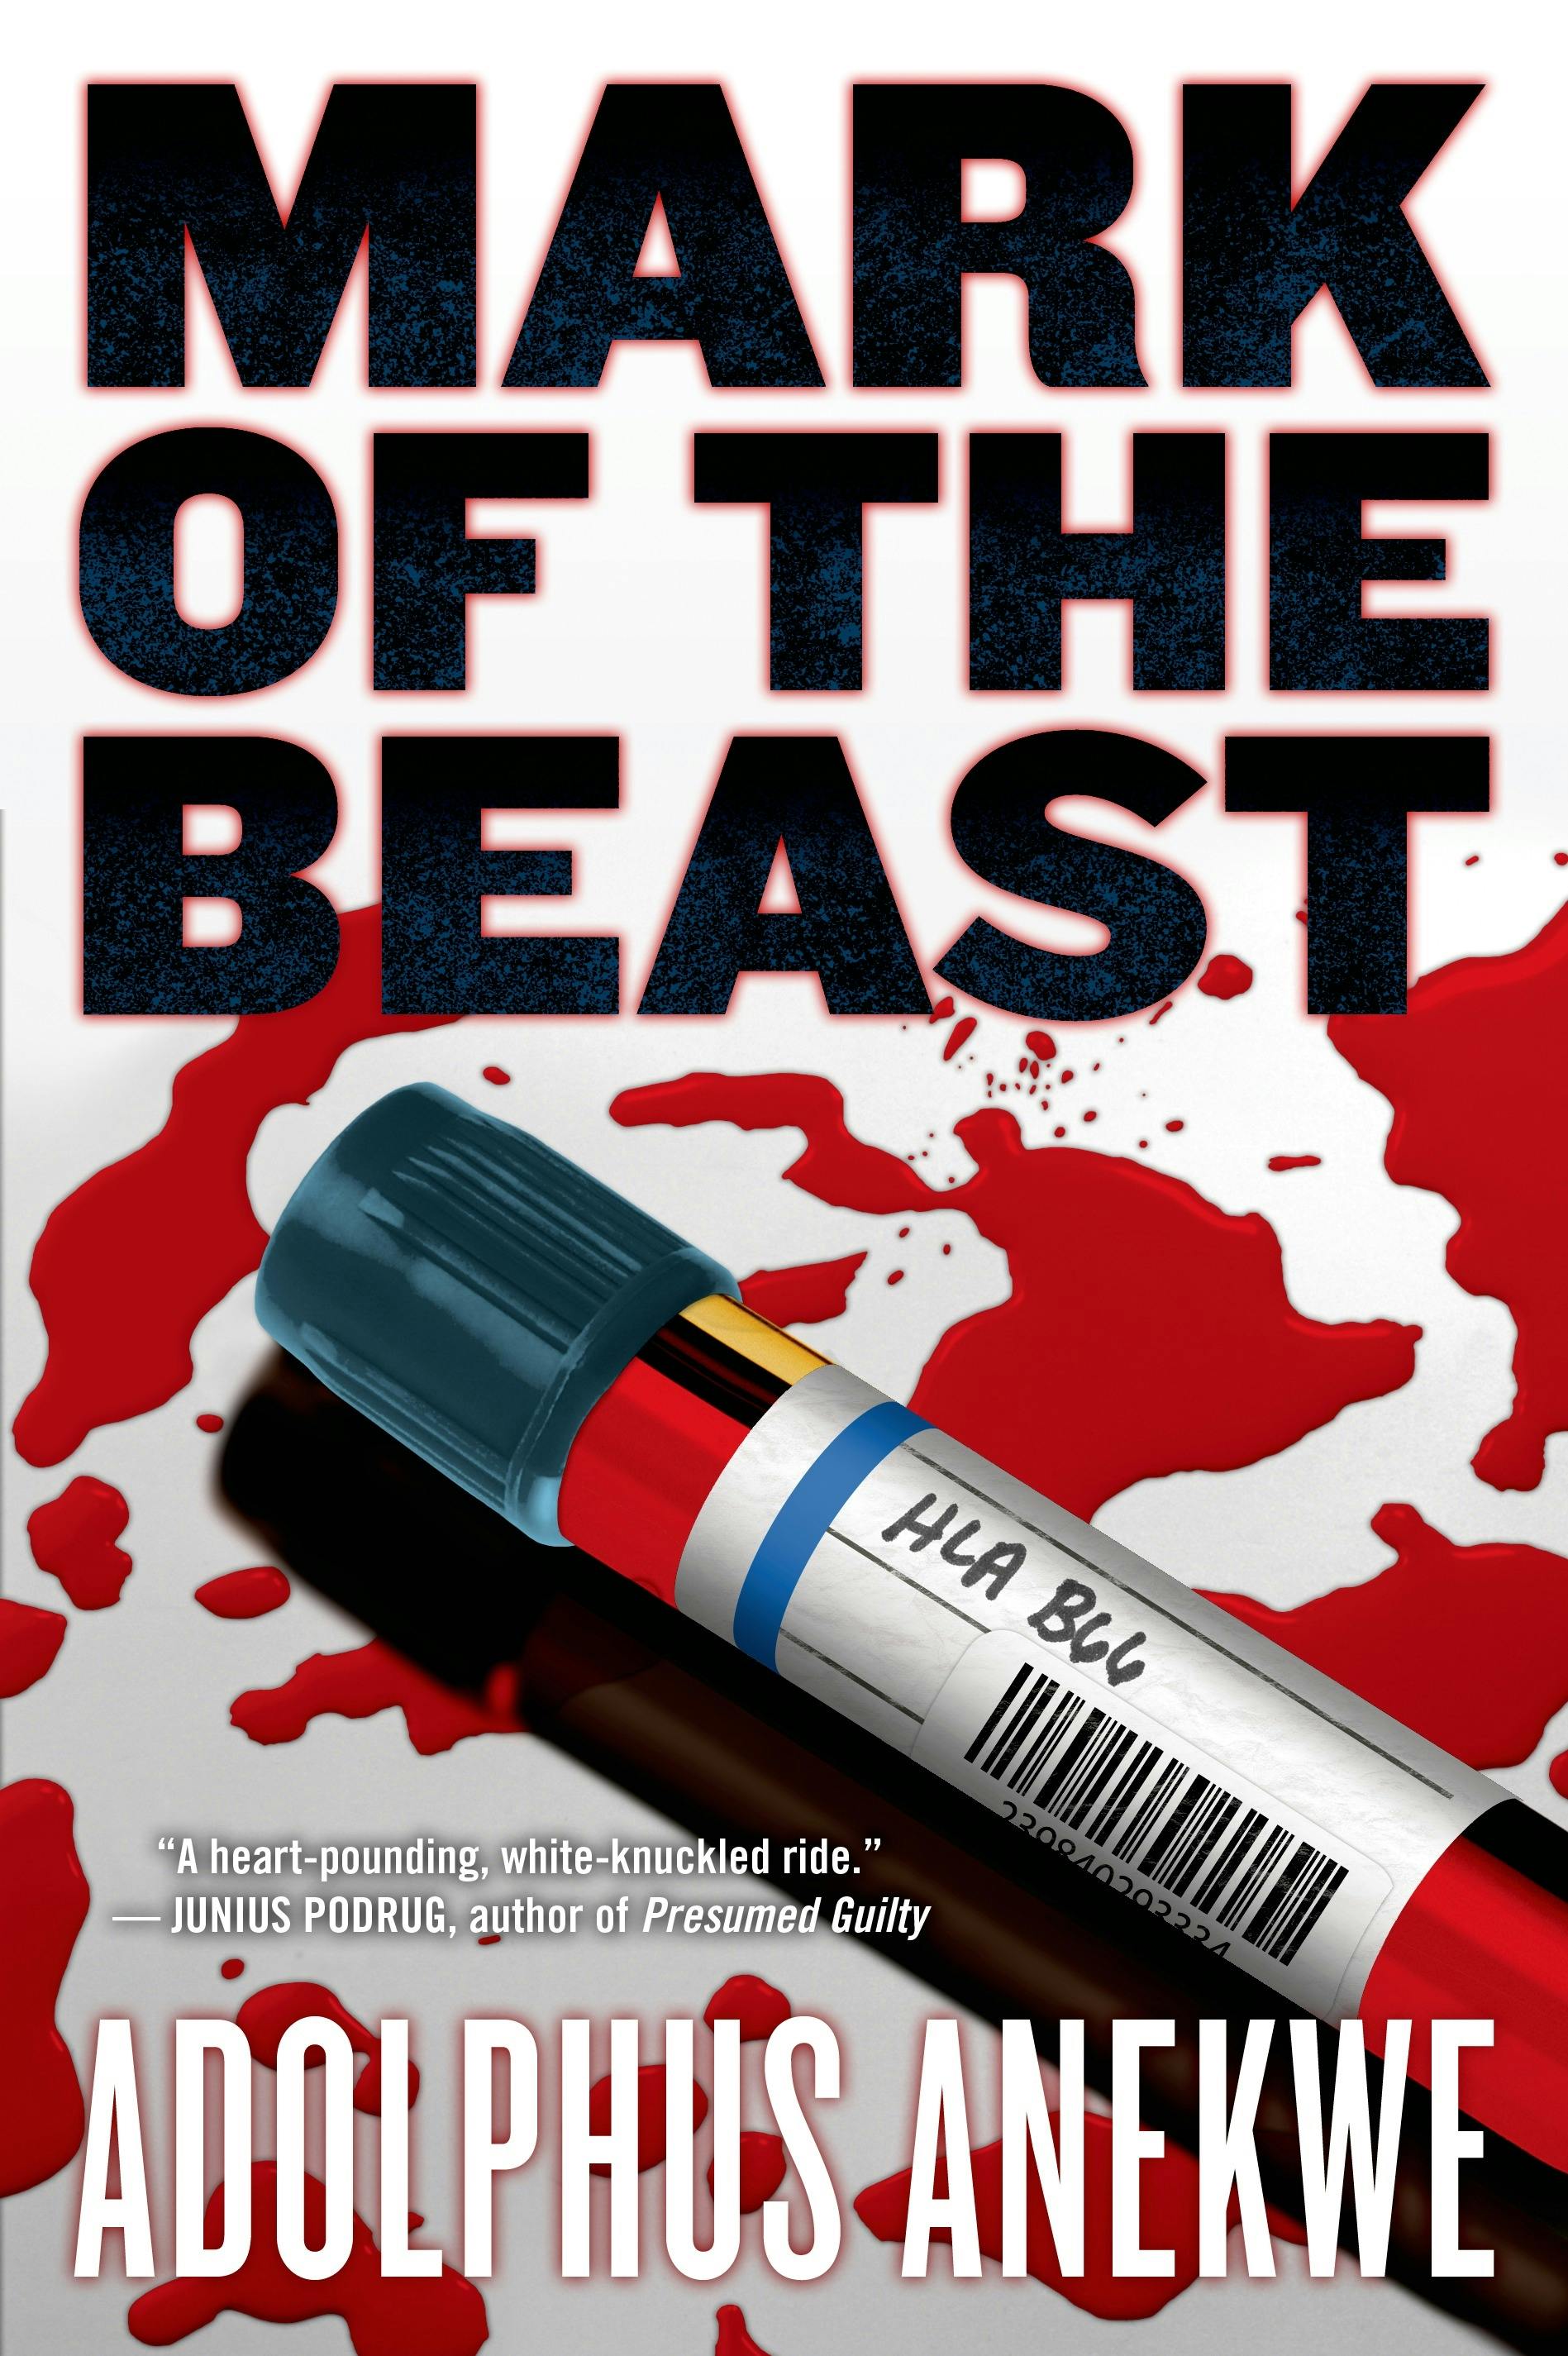 Cover for the book titled as: Mark of the Beast